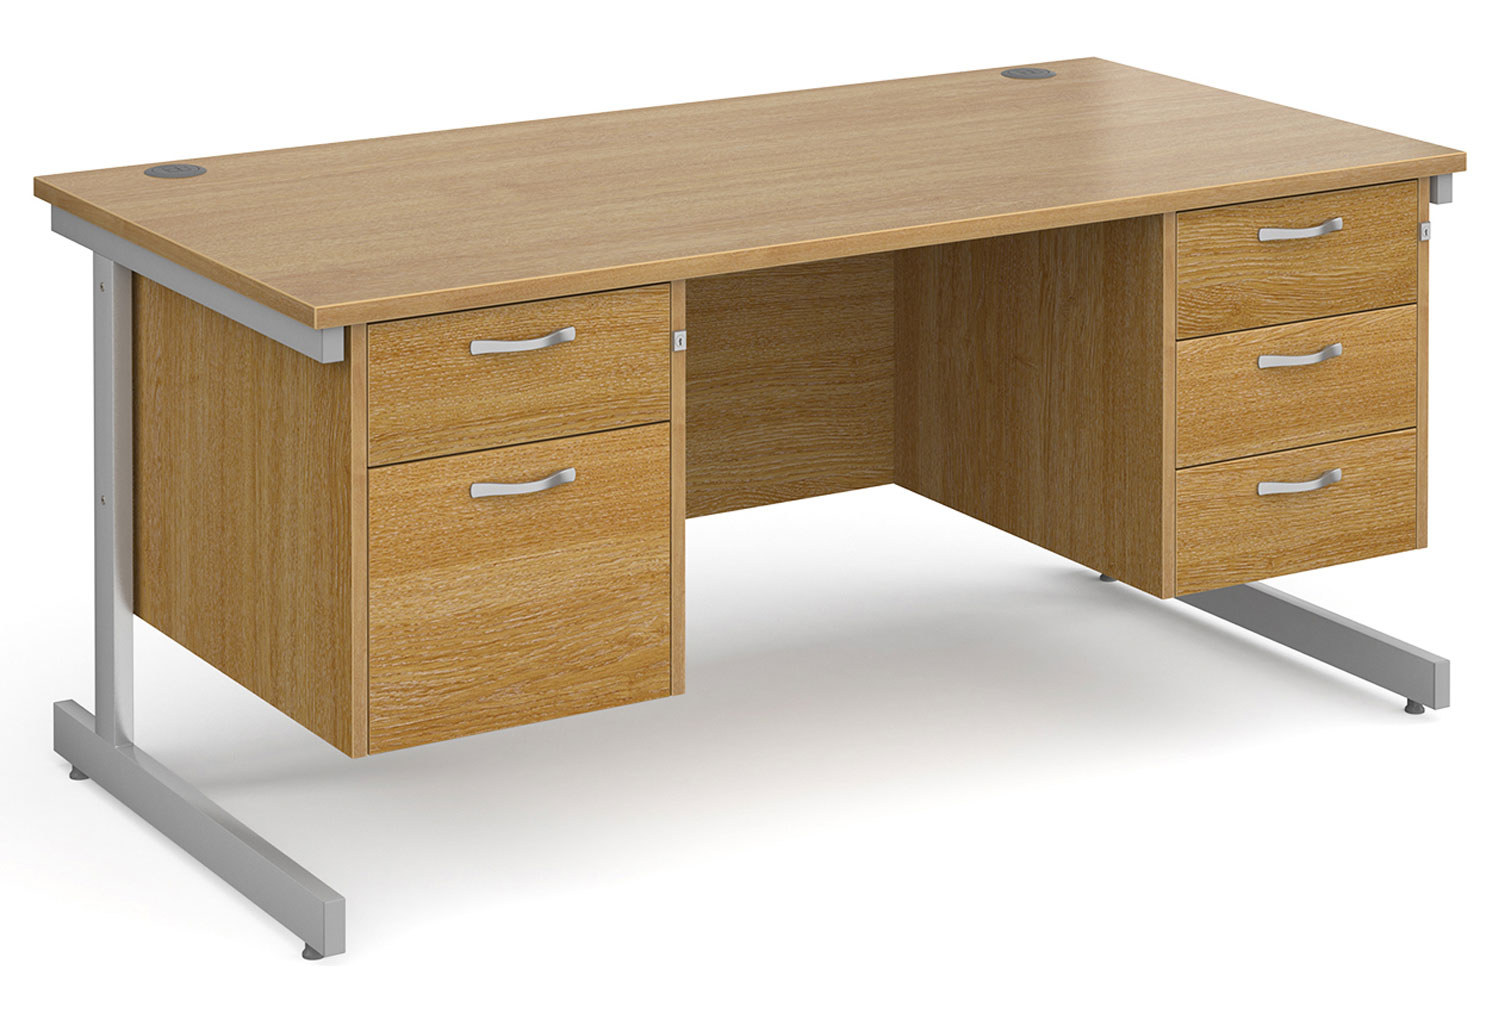 All Oak C-Leg Executive Office Desk 2+3 Drawers, 160wx80dx73h (cm), Fully Installed